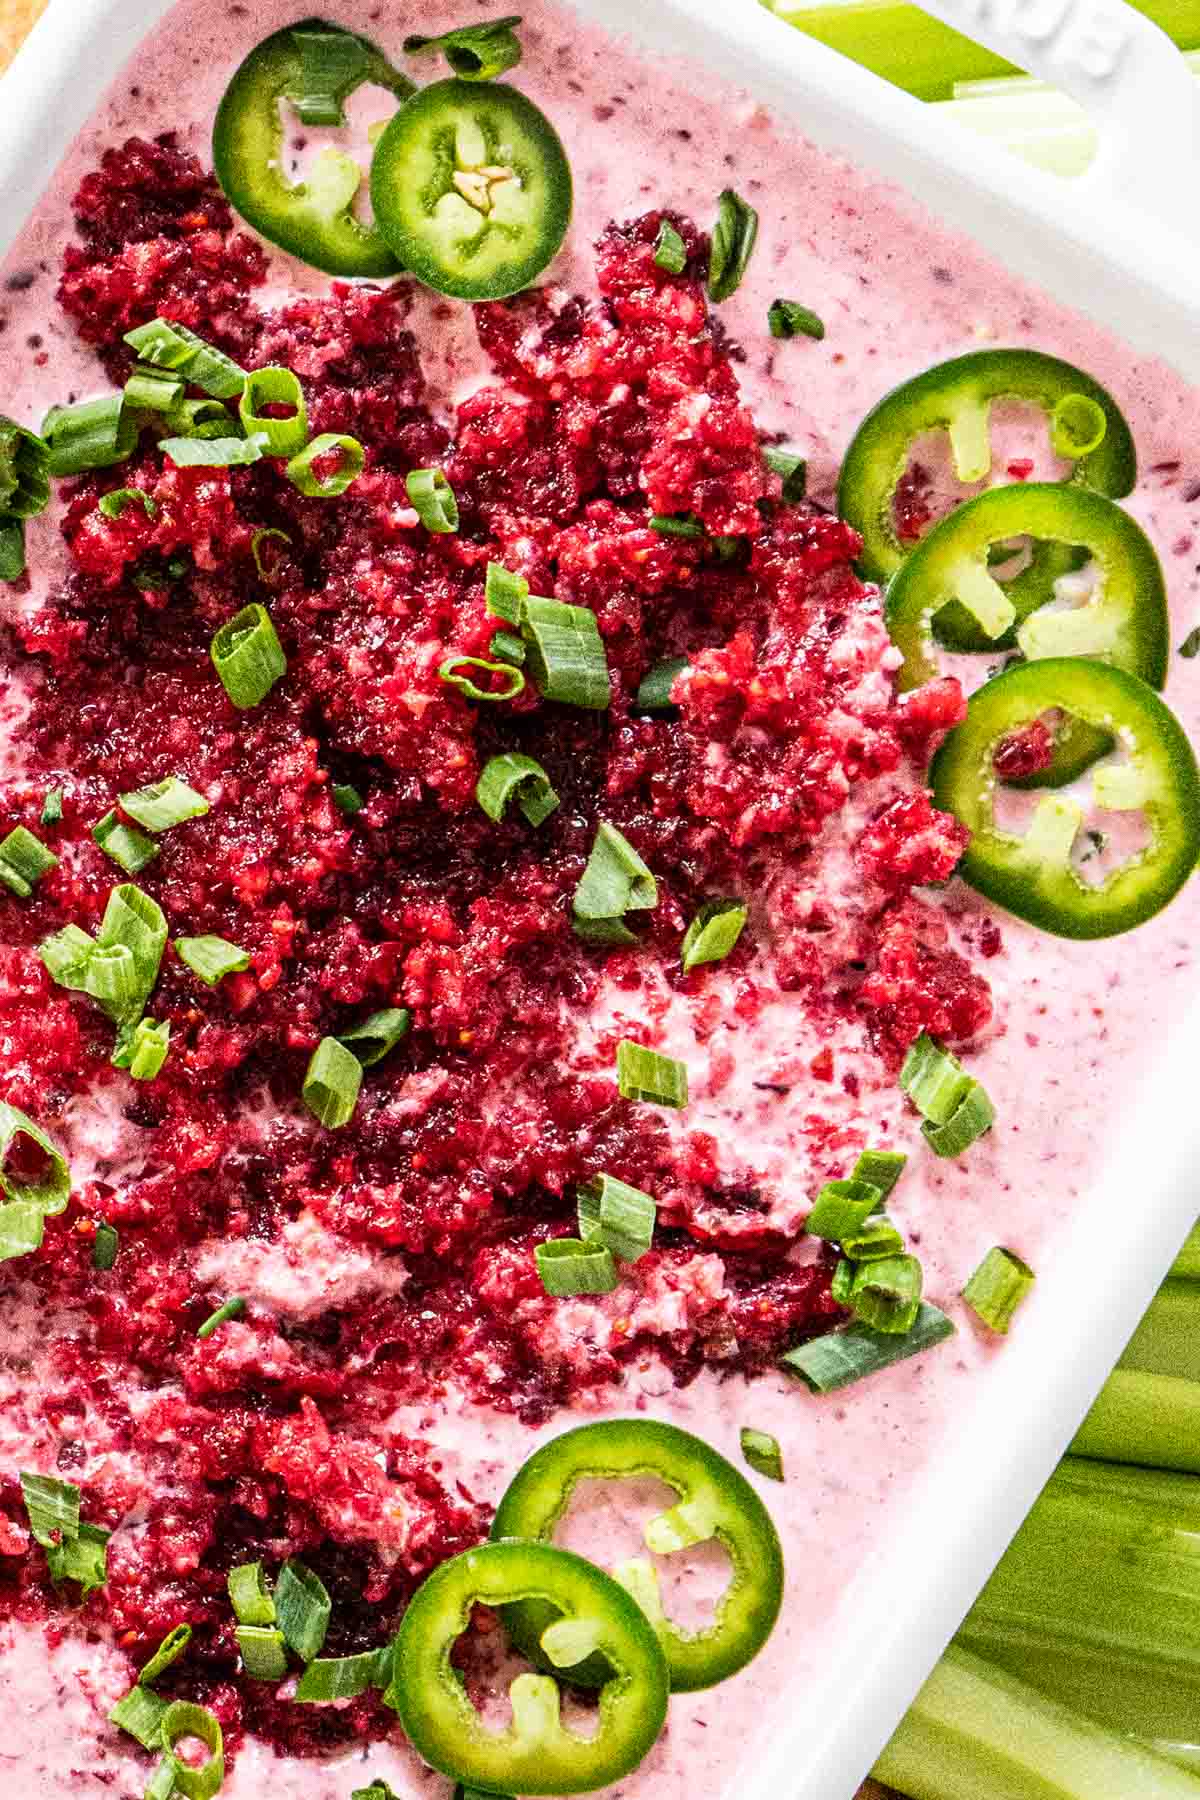 Cranberry jalapeno dip in a bowl.